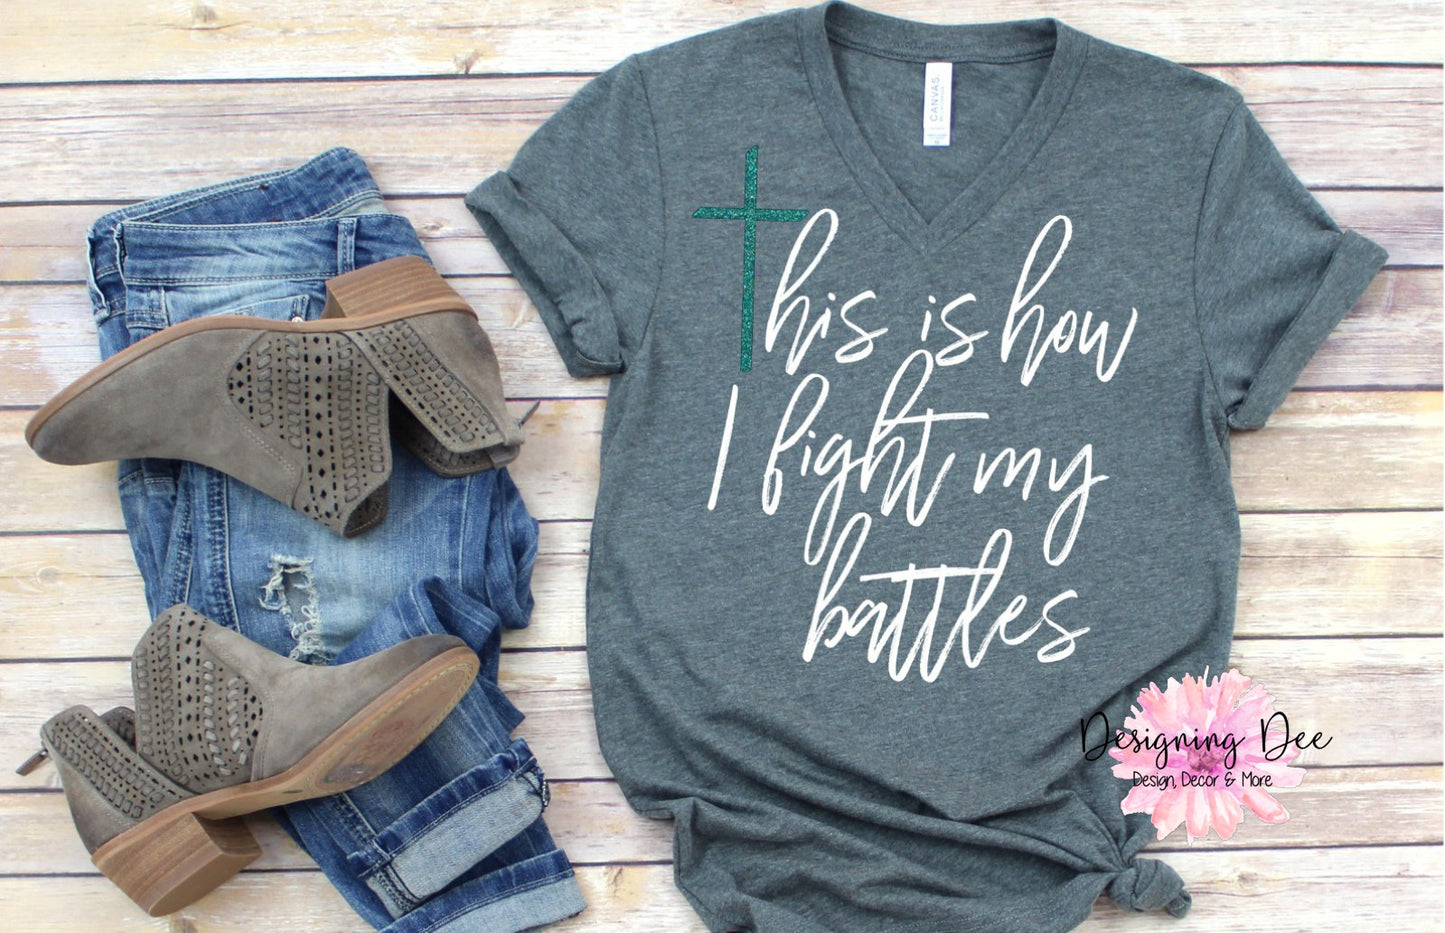 Women's Christian T shirt - This is how I fight my battles